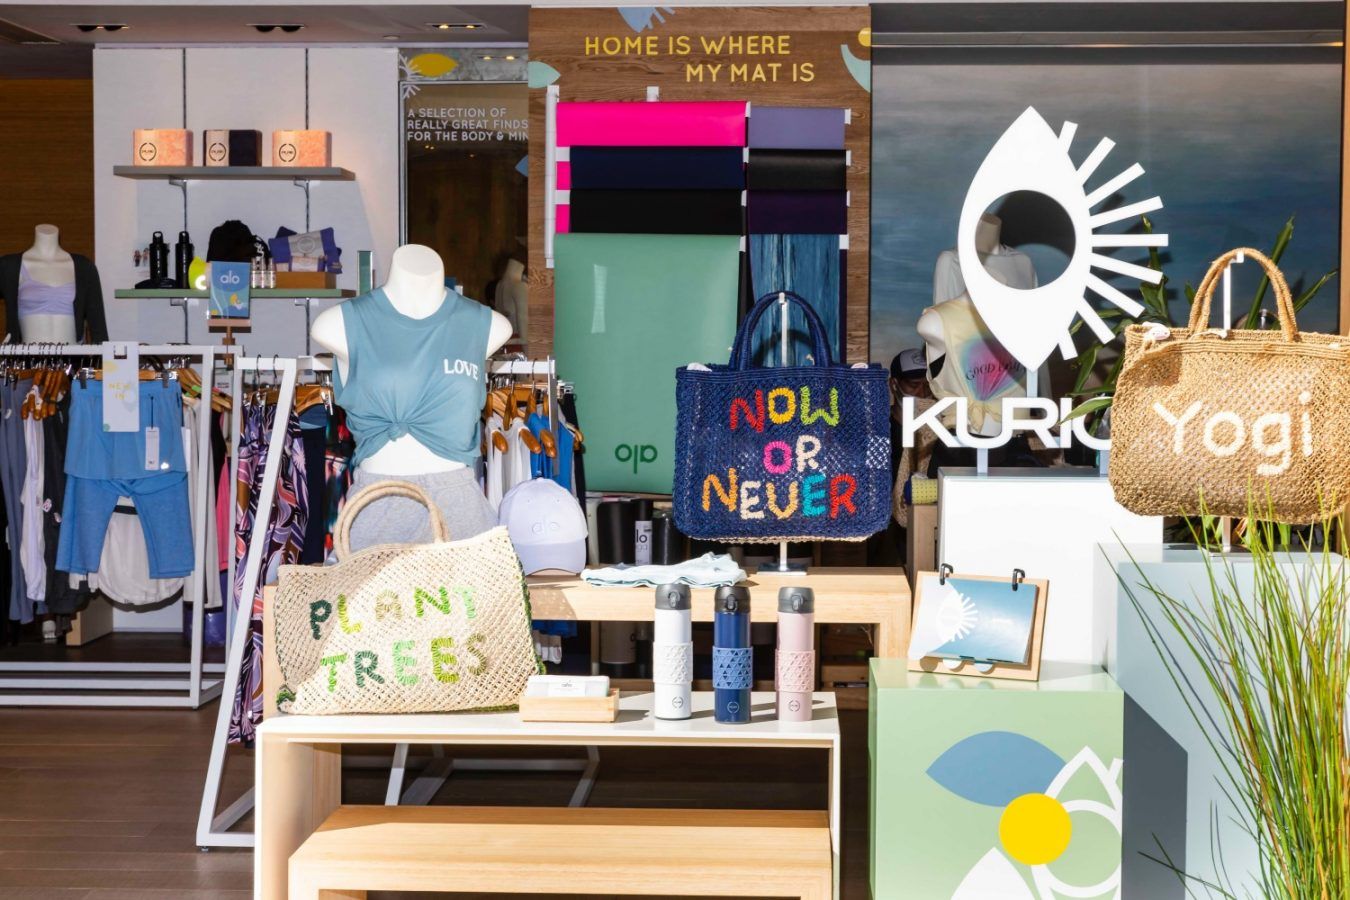 Shop Kurios: A New Lifestyle and Wellness Brand by Pure Group and Rue Madame